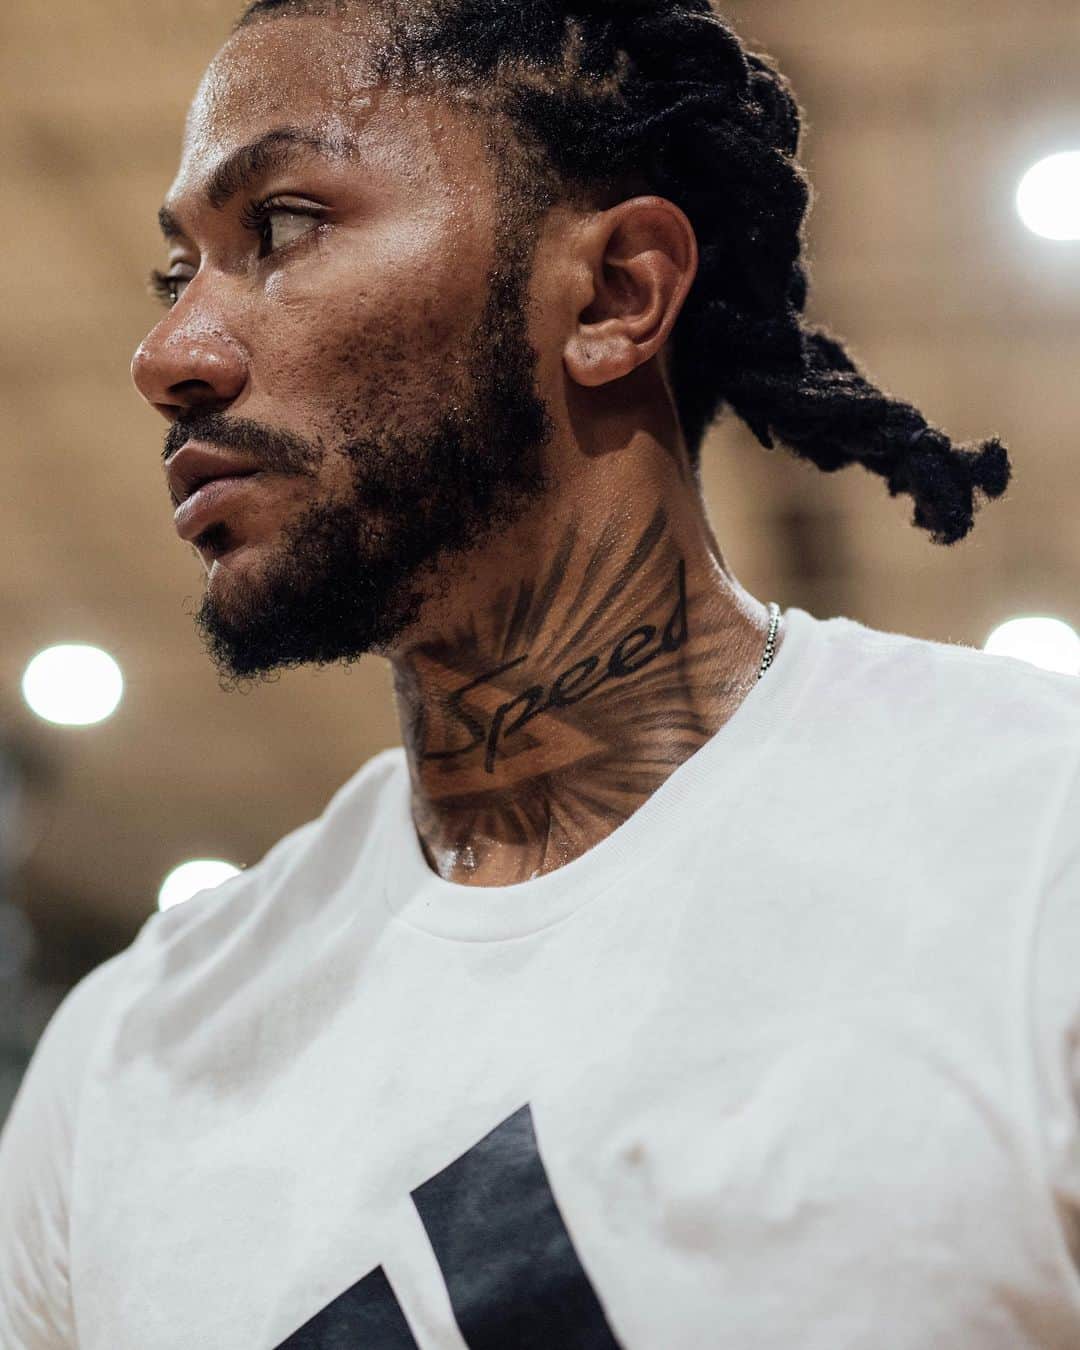 adidasのインスタグラム：「"It's hard trying to fight the system when you have all of these boundaries. You have to fight through so many elements to find out who you are."⁣  ⁣ Derrick Rose (@drose) talks about growing up in Chicago, his career, and how he's learned to be open in order to understand others.⁣  ⁣ Watch the latest episode of #ReadyForChange now on @adidasHoops.」